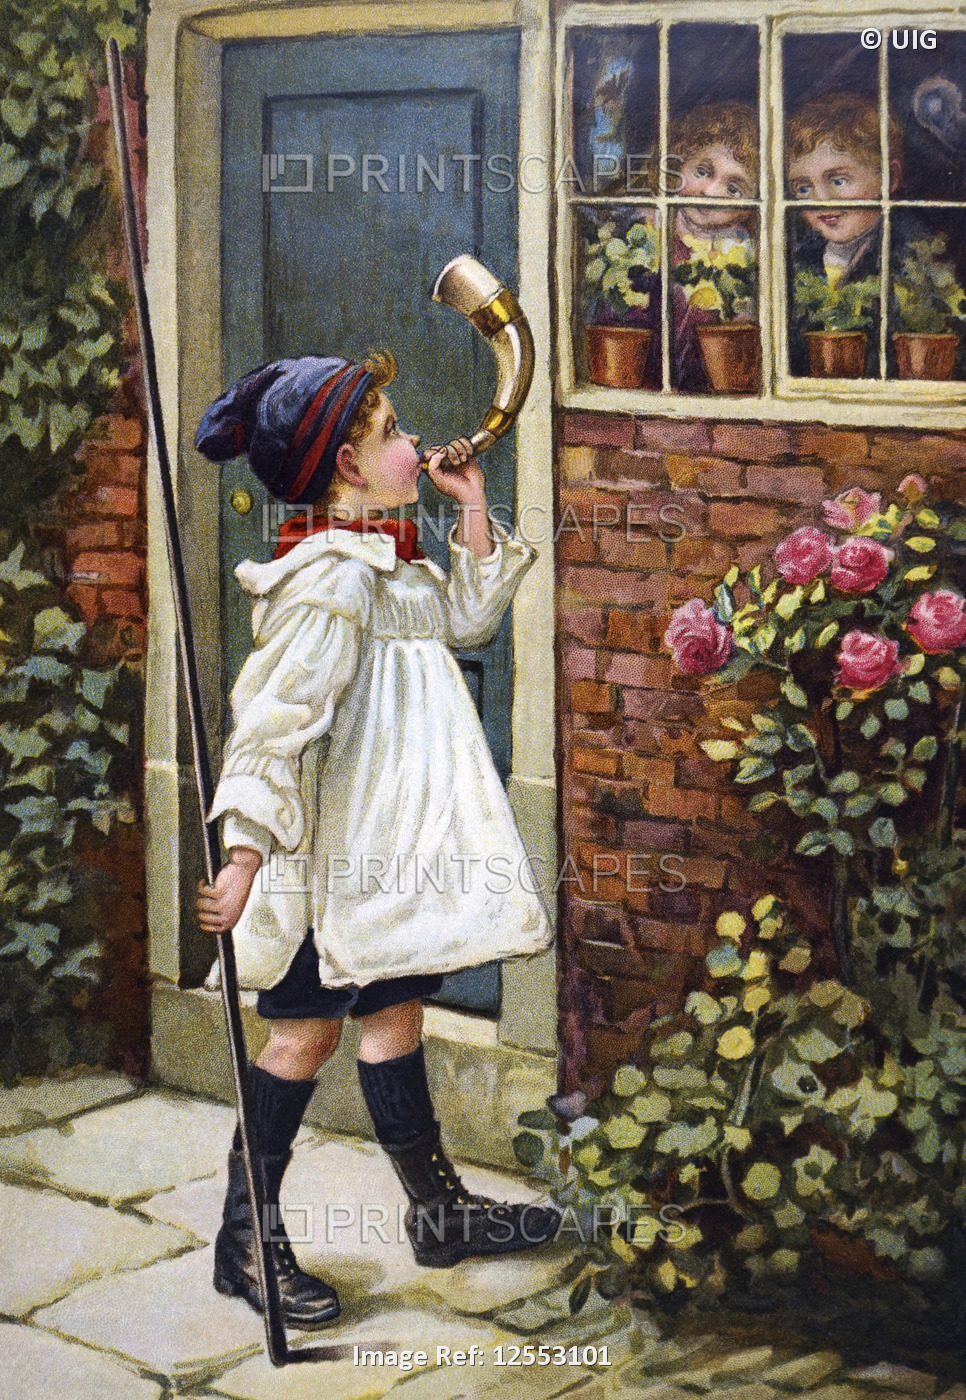 Painting depicting a young boy blowing a horn outside of his home, 20th century